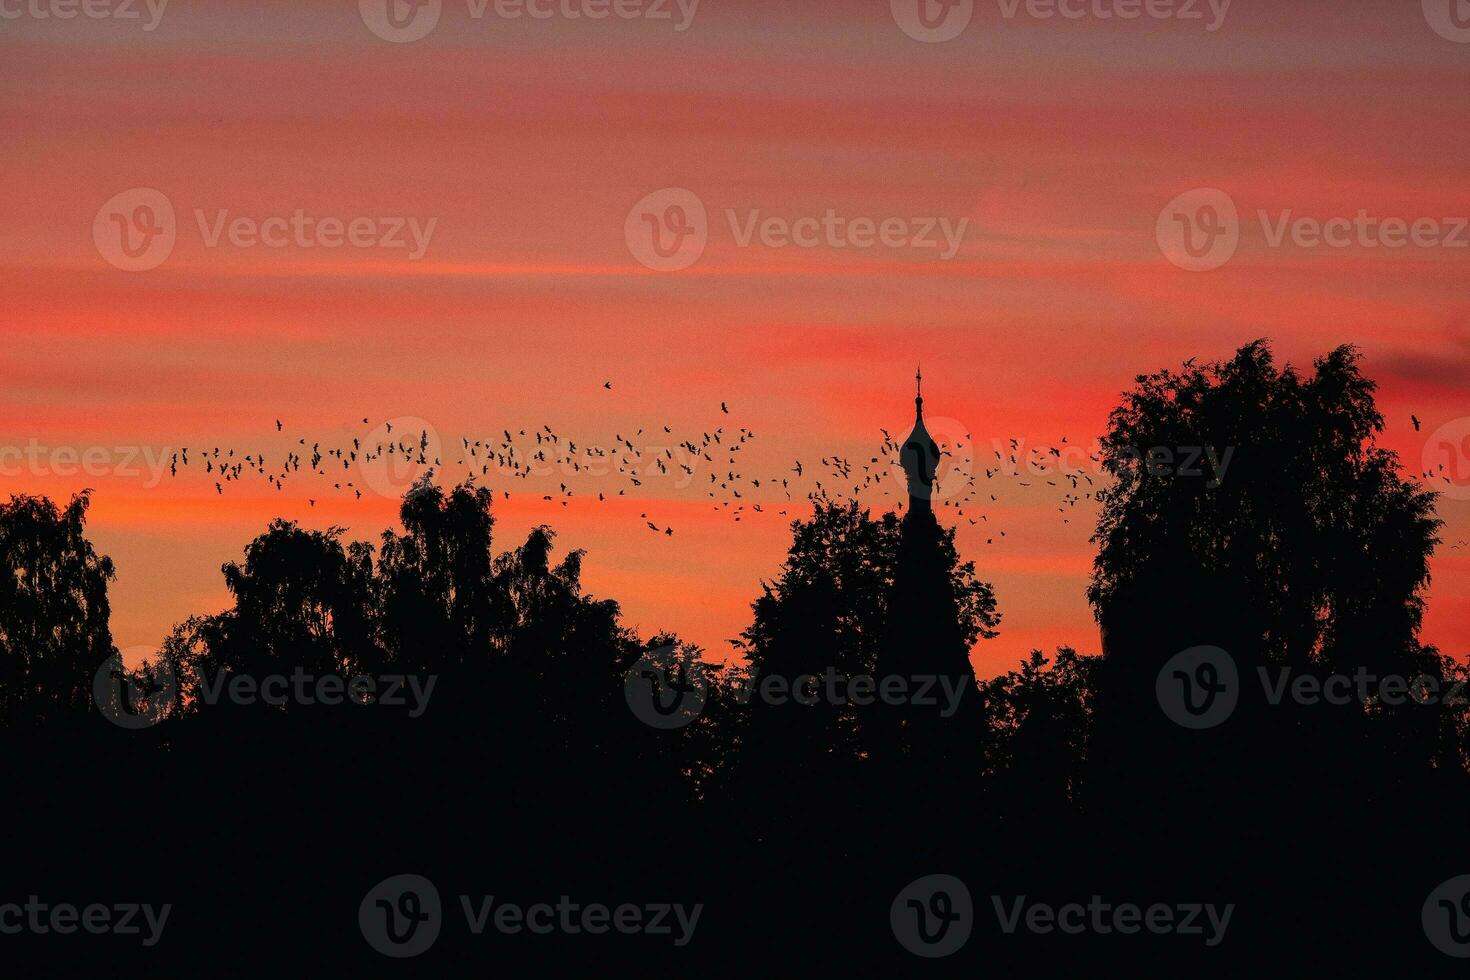 A flock of birds against the background of a Church and a red sunset. A mystical concept photo